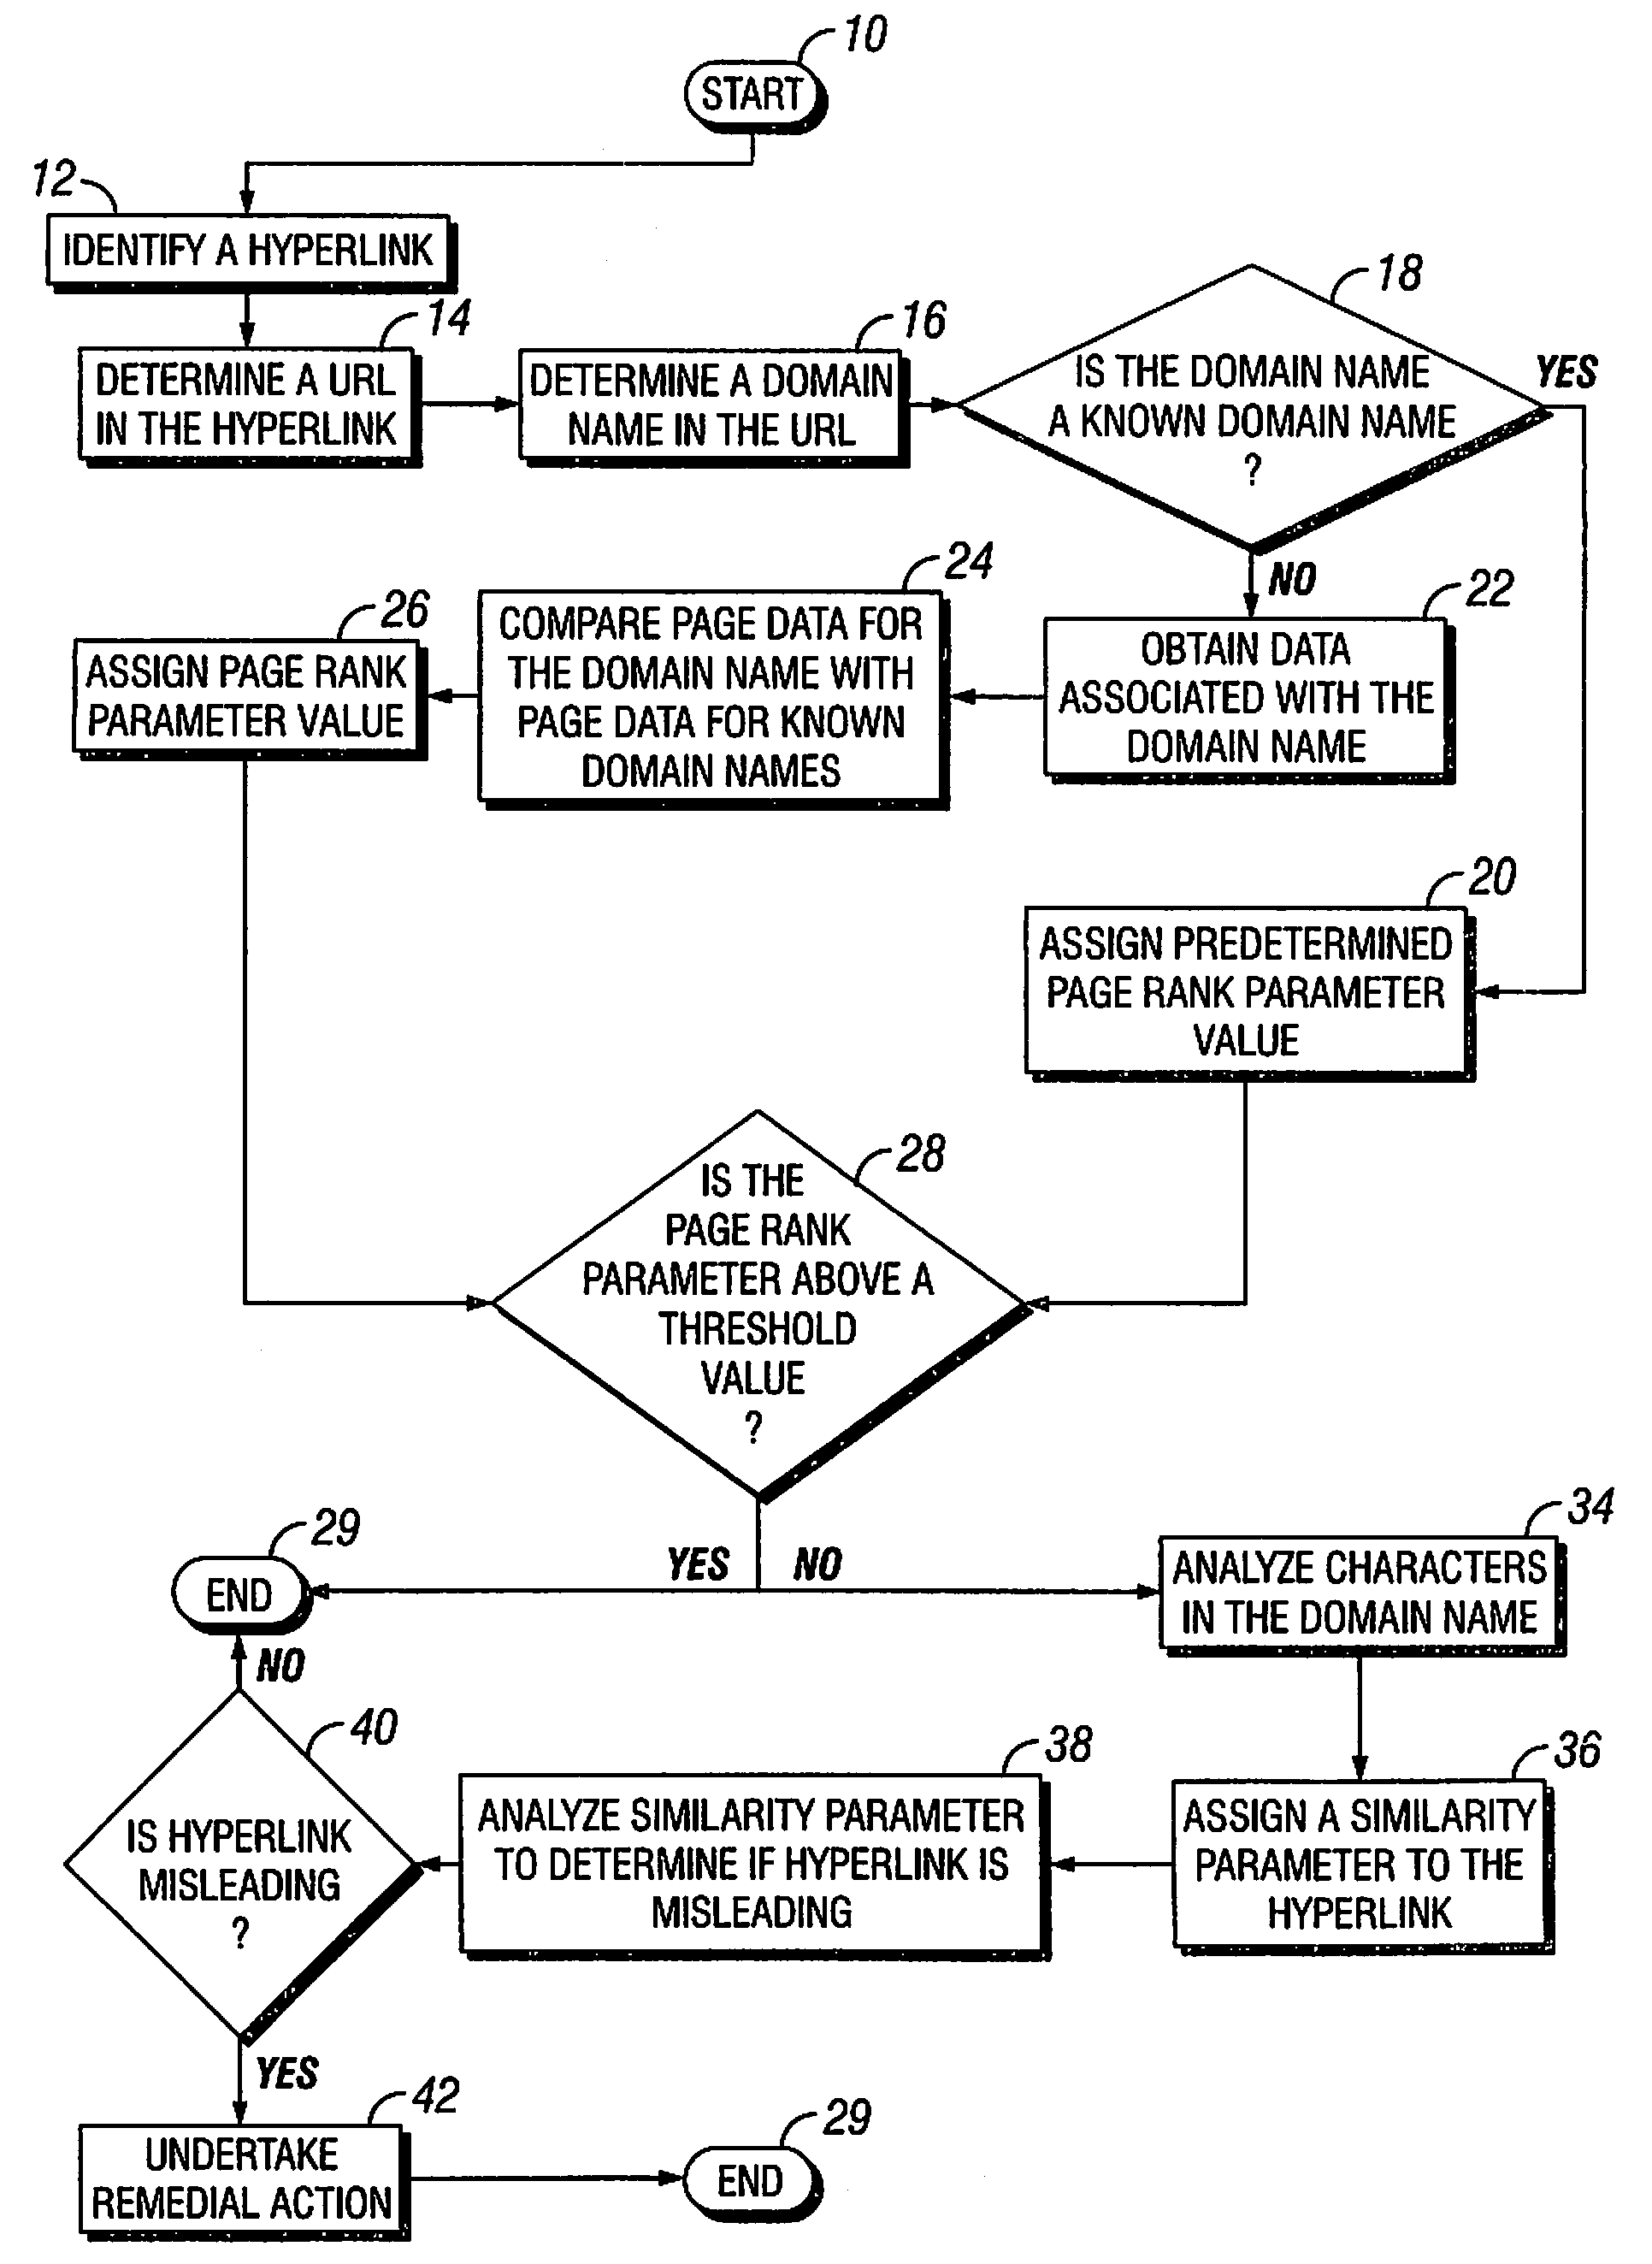 Method for Detecting and Remediating Misleading Hyperlinks